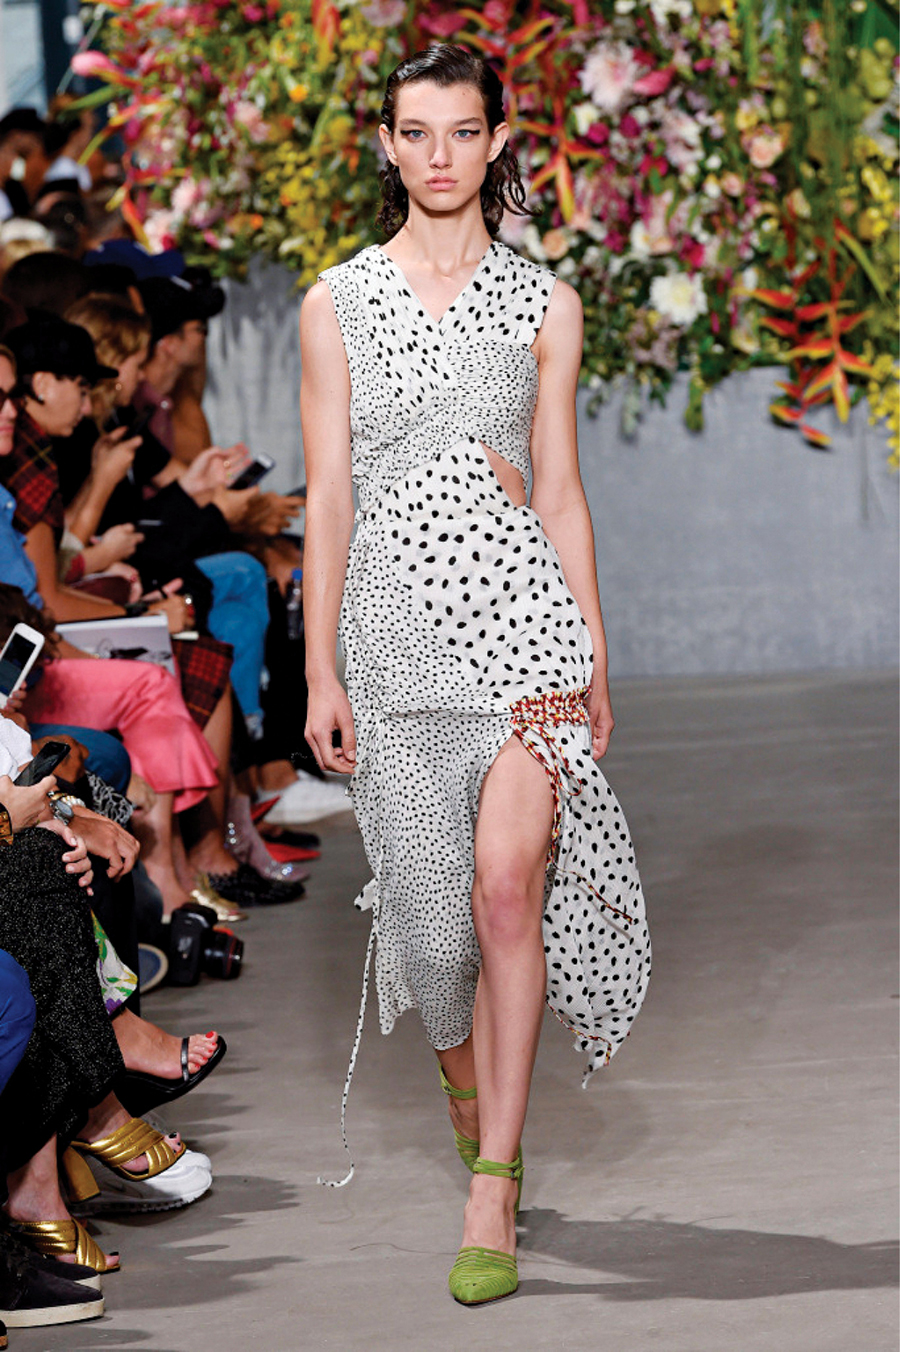 The Lust Lineup: Seeing Spots with Polka Dot Fashion Accessories